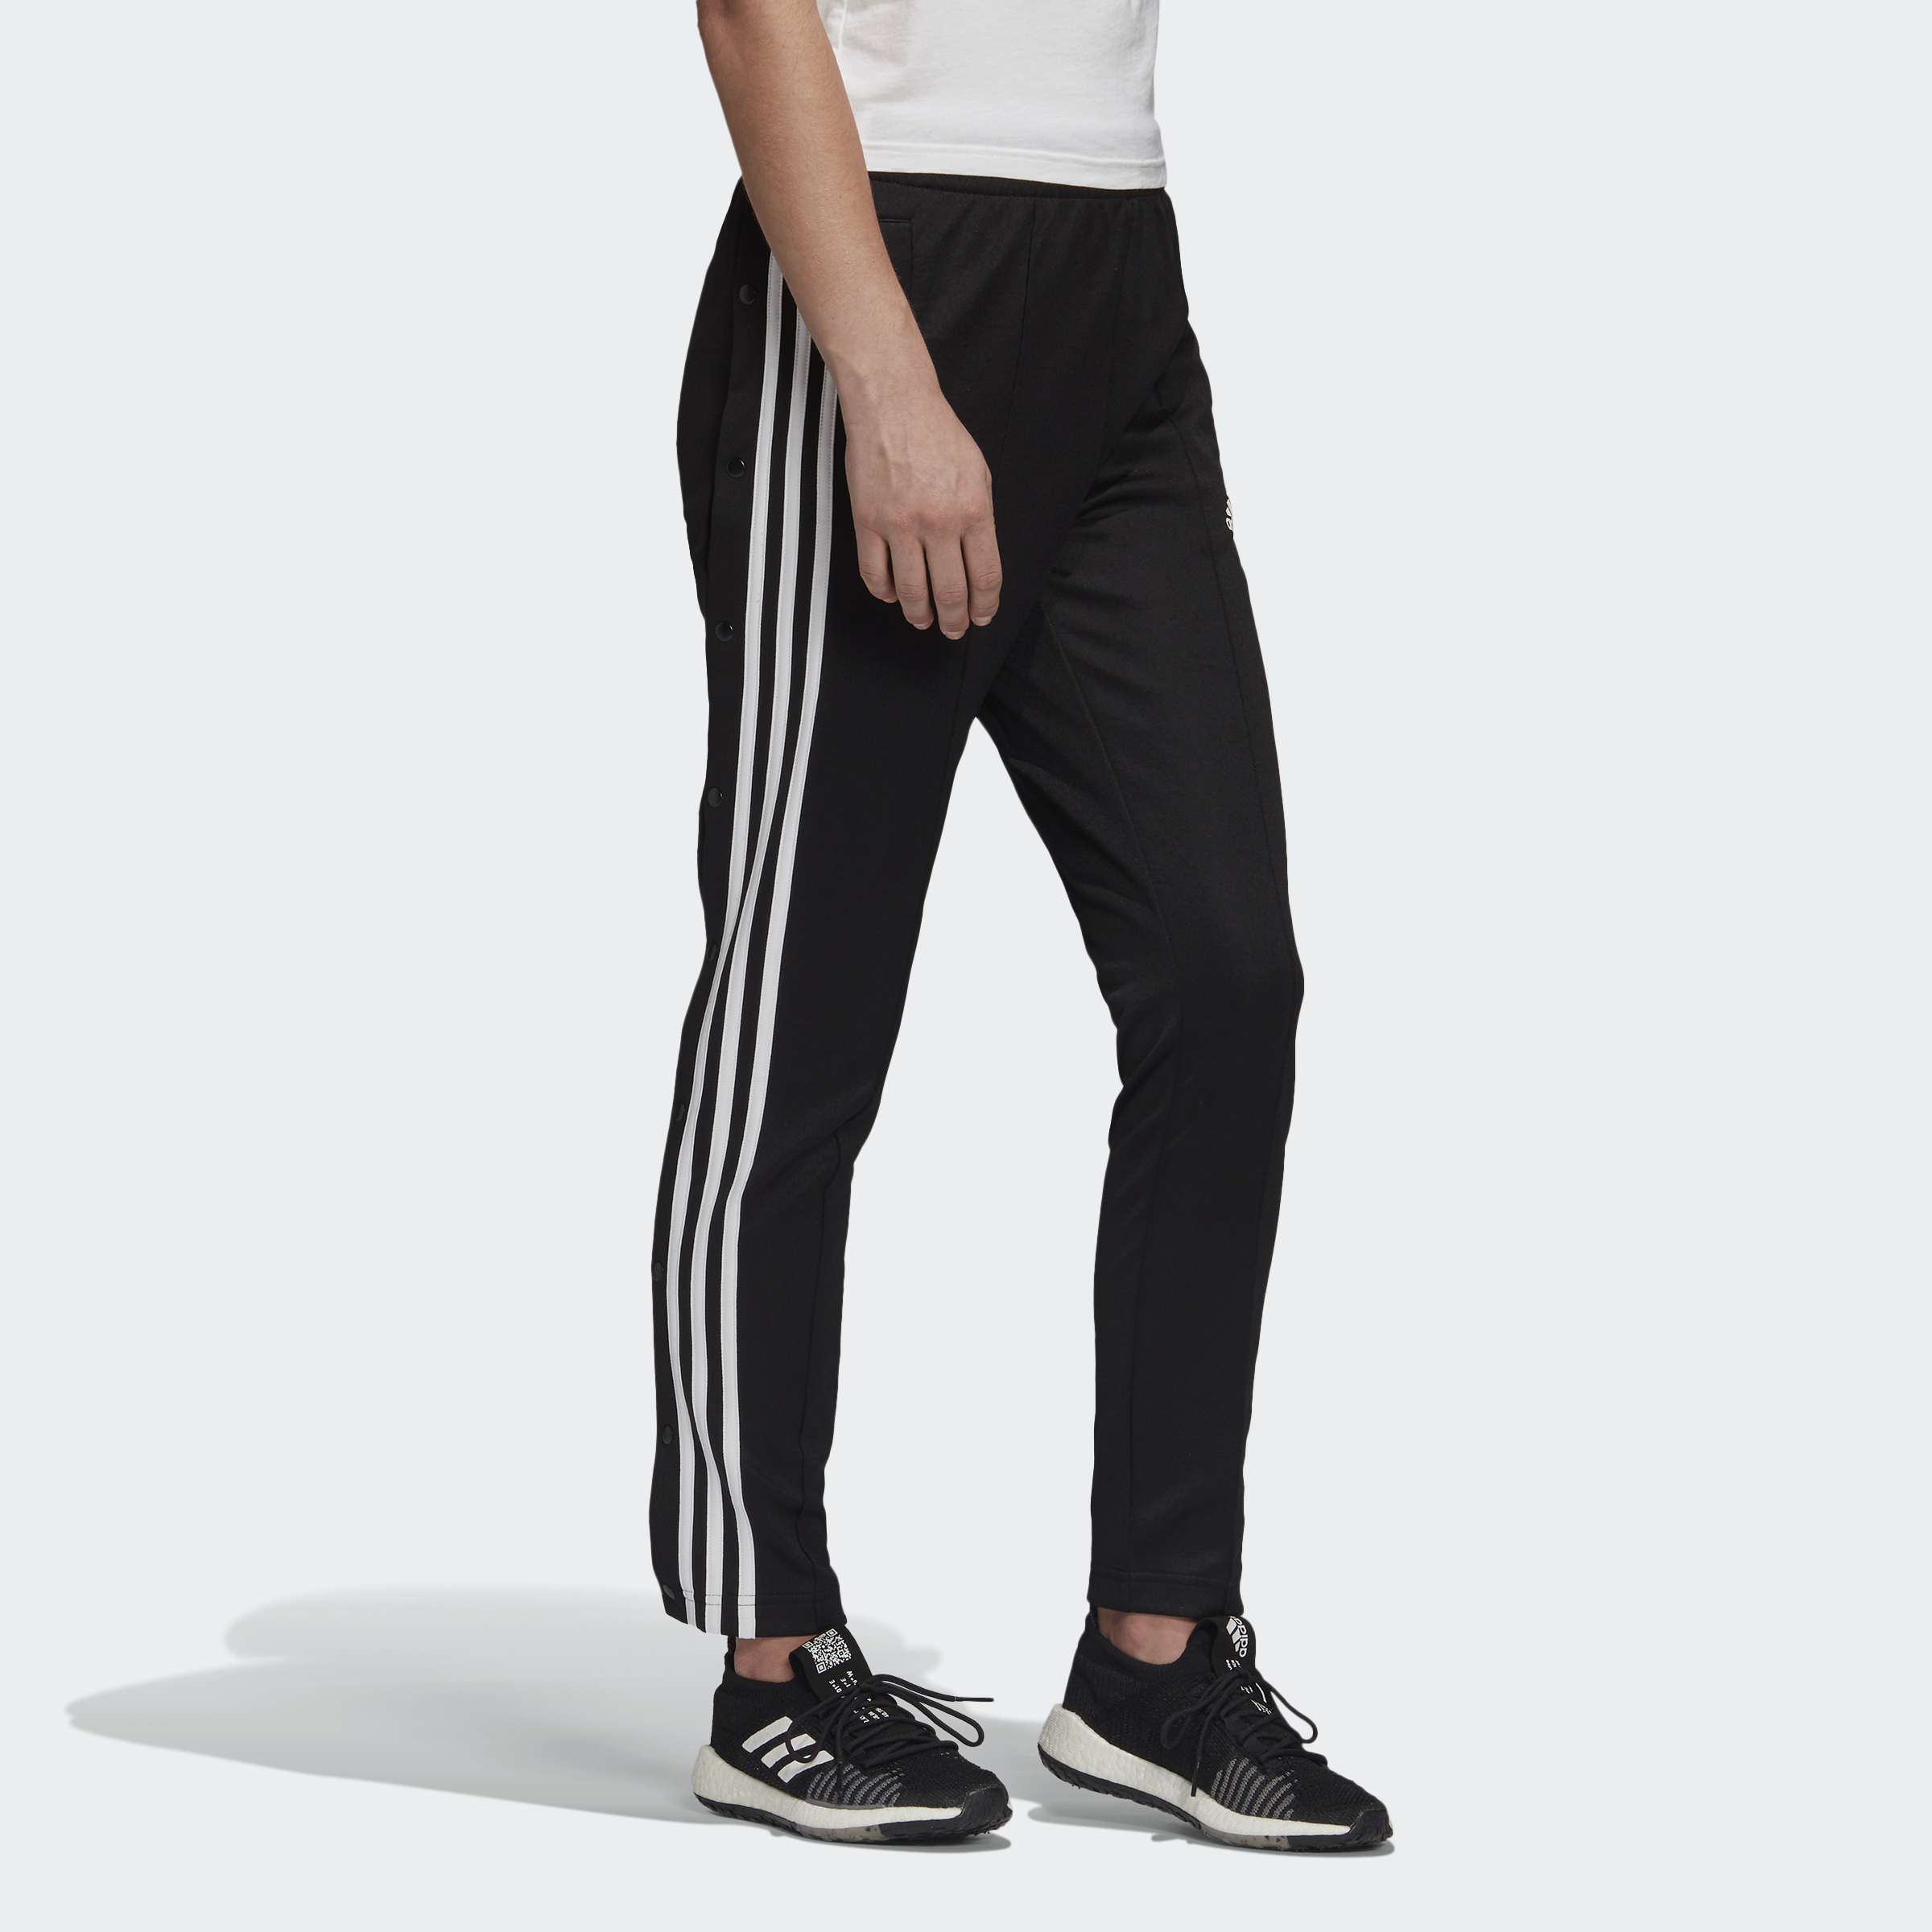 Adidas Snap Button Pants Mens Fashion Activewear on Carousell